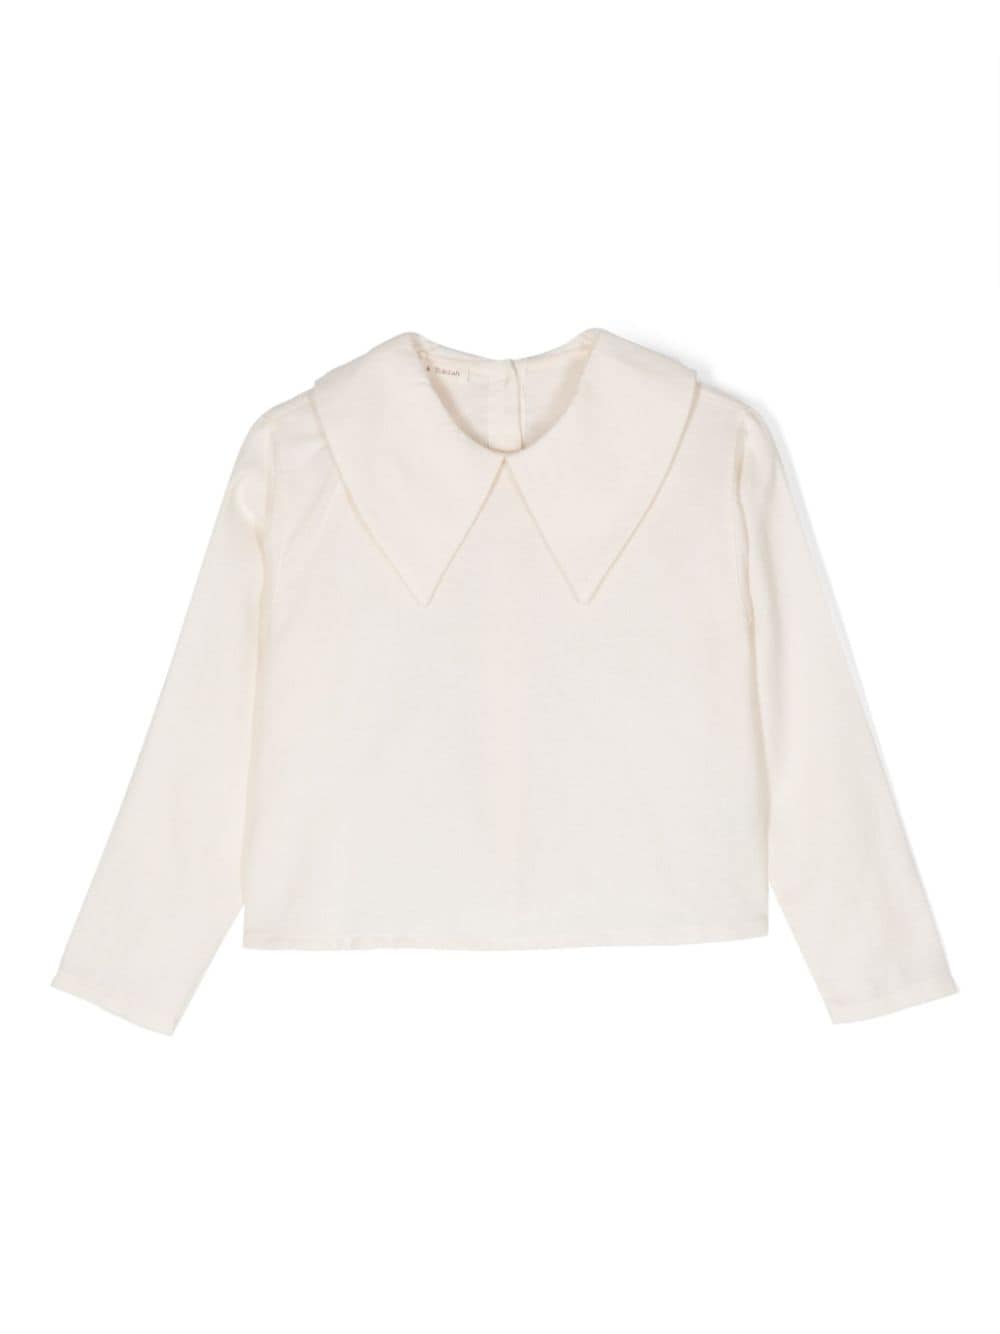 Image 1 of Zhoe & Tobiah pointed-collar textured blouse